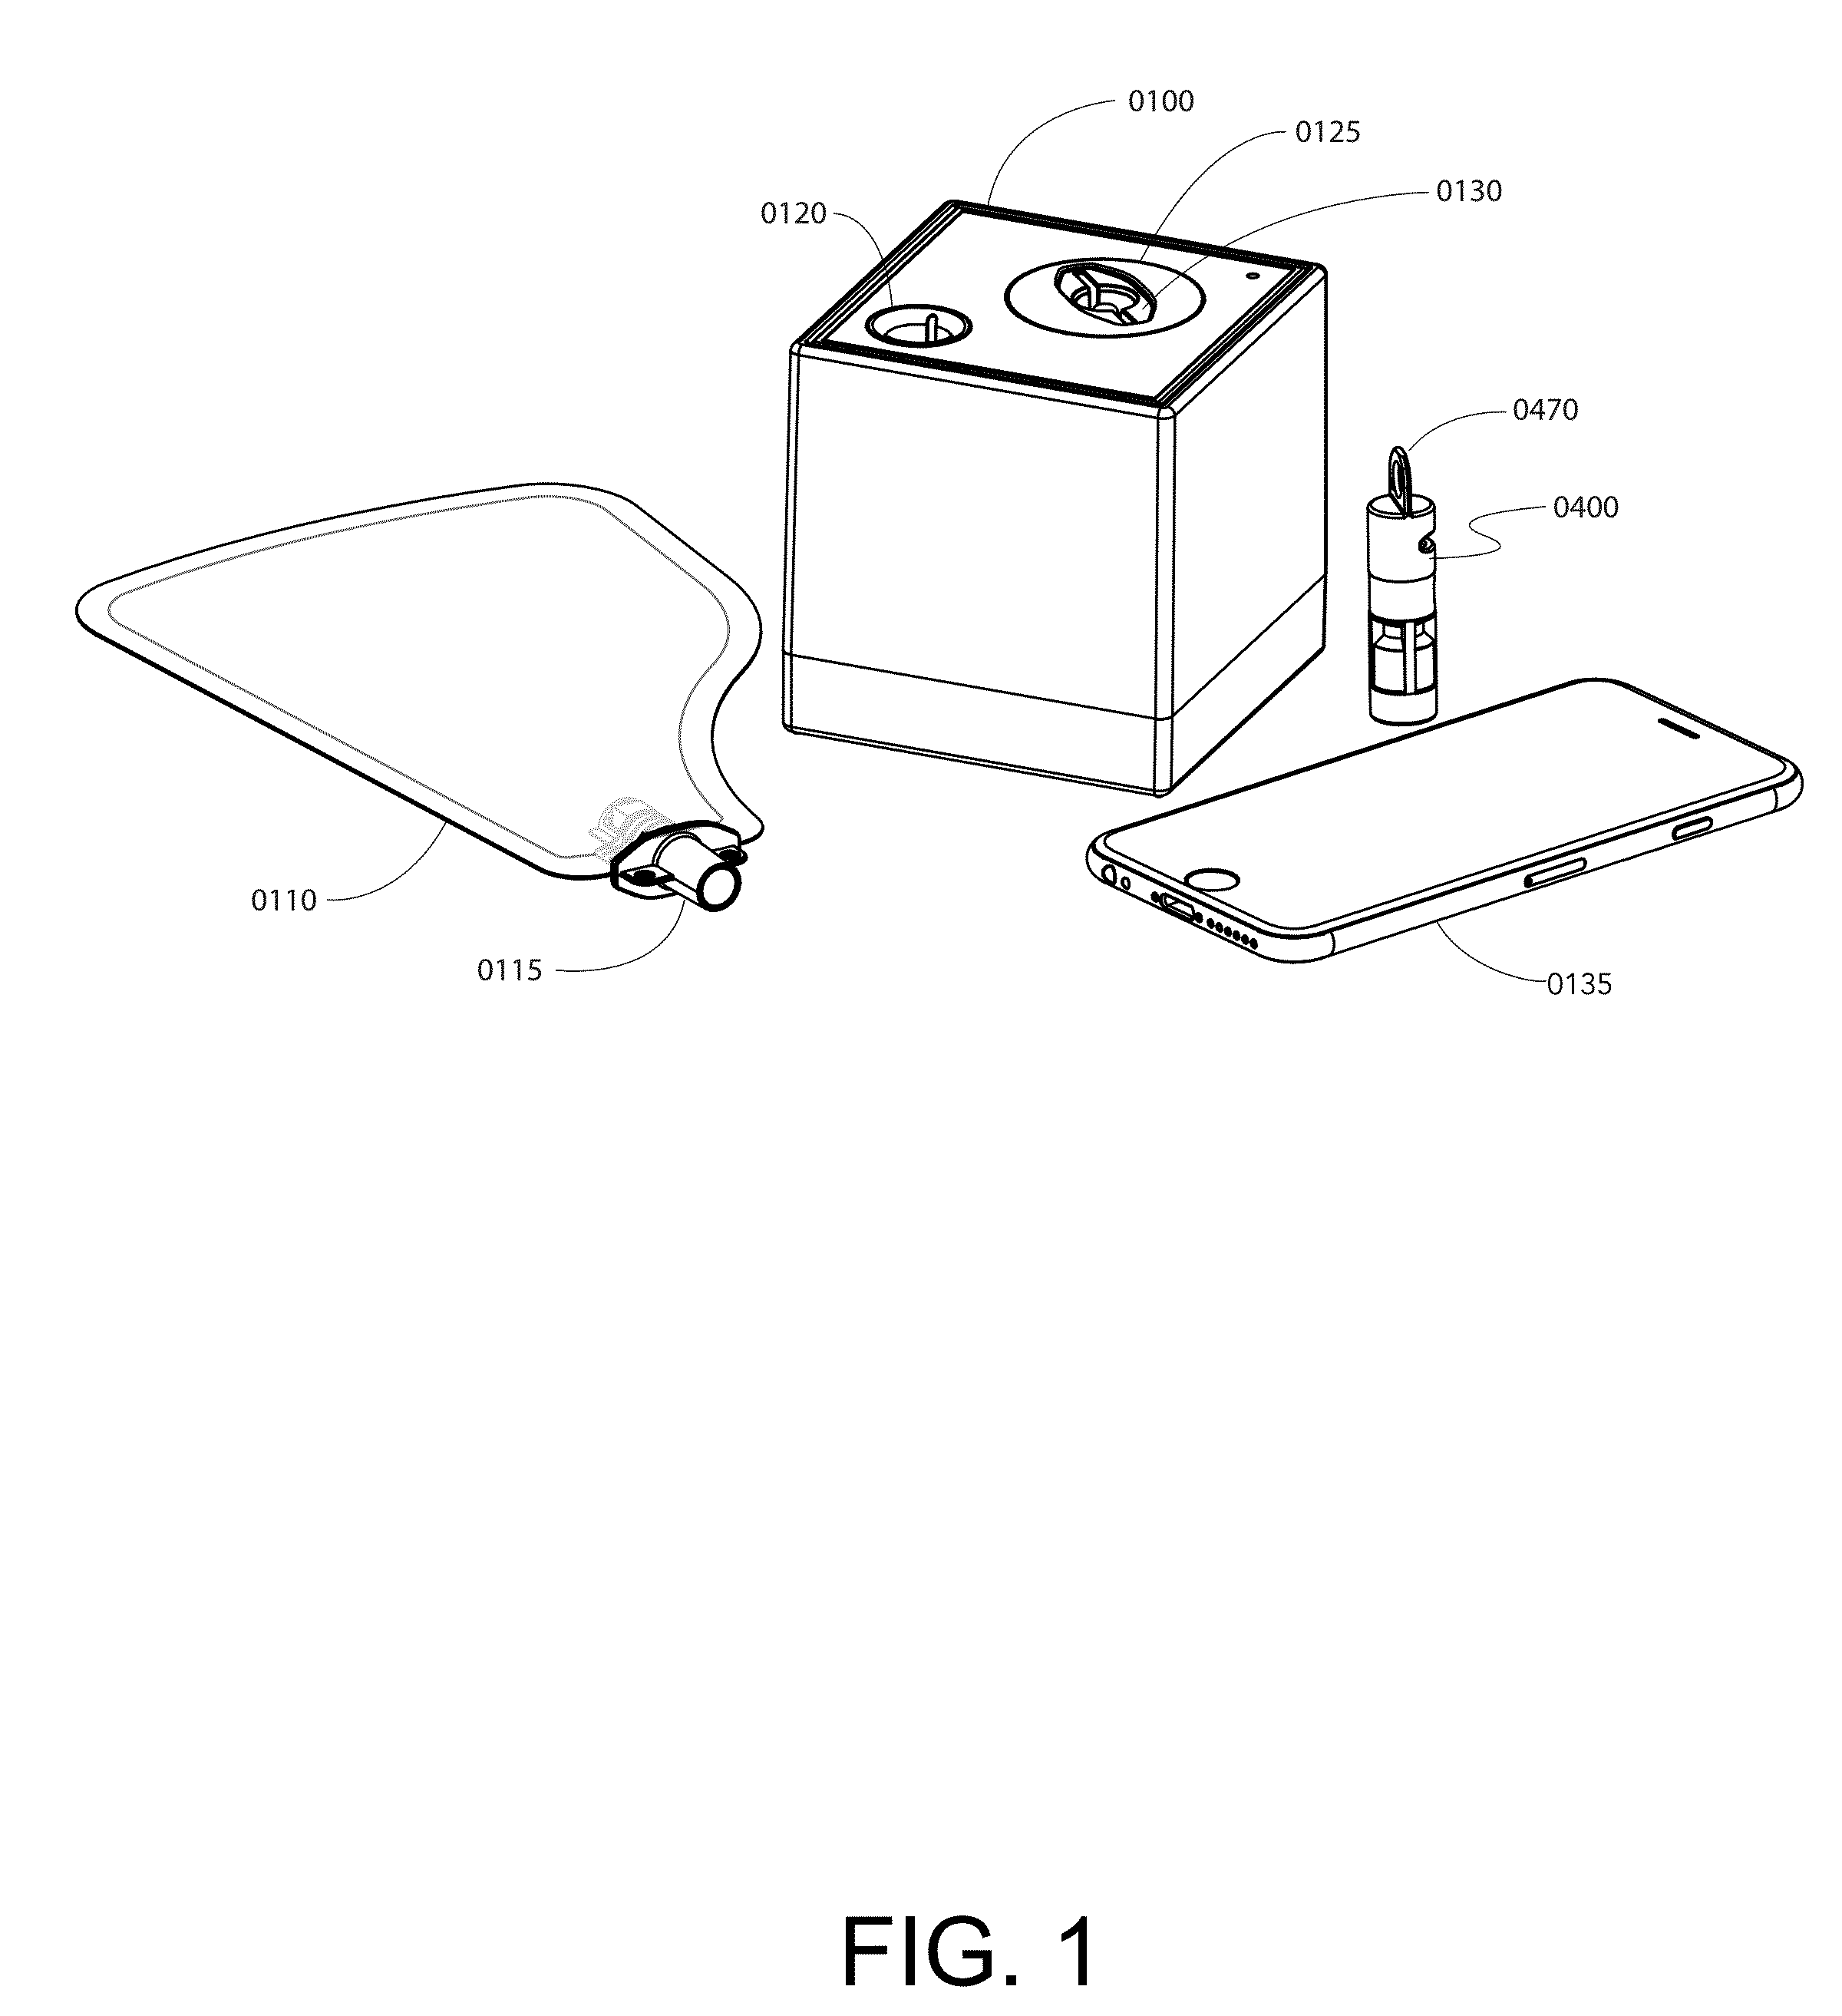 Method and apparatus for rapid quantification of an analyte in breath